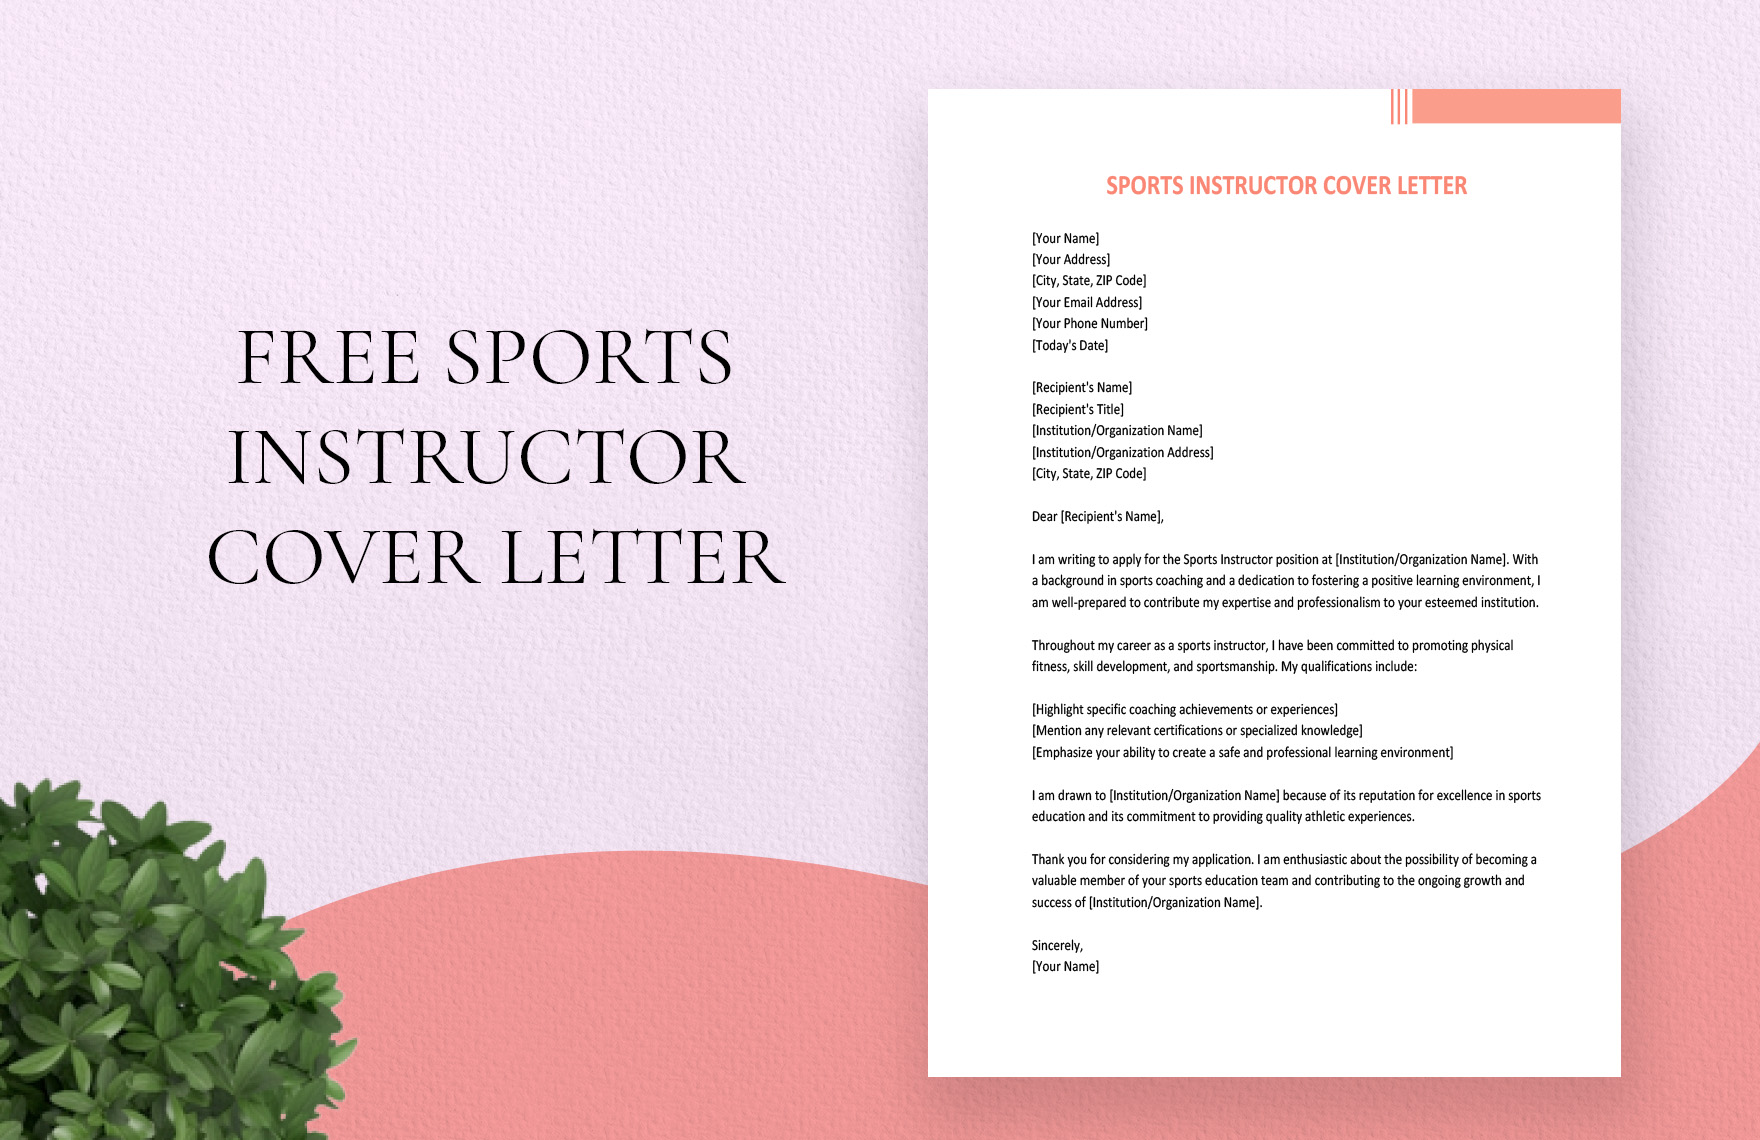 Sports Instructor Cover Letter in Word, Google Docs